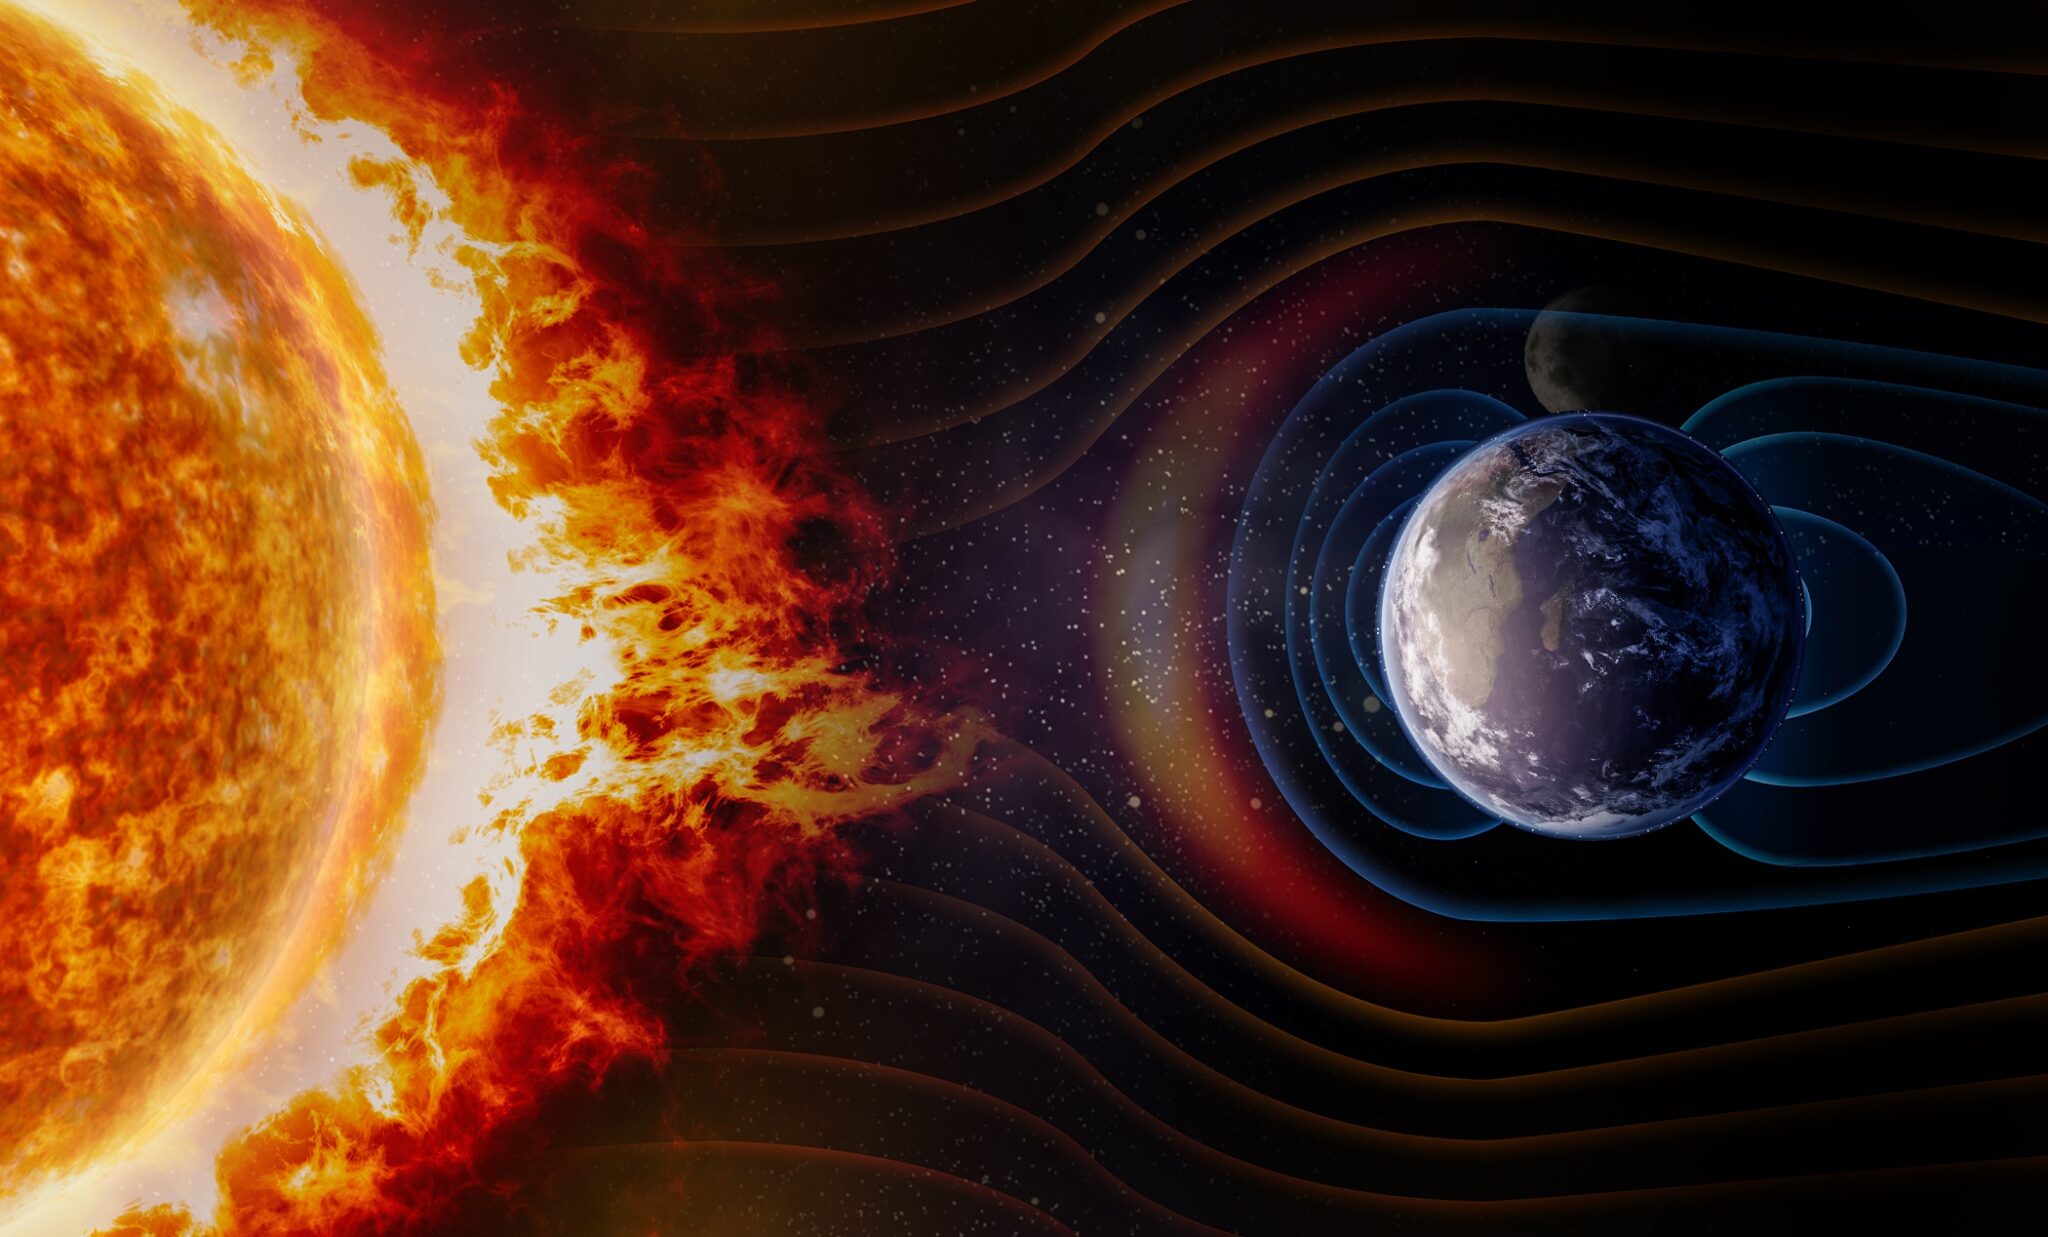 A solar storm could hit Earth this Tuesday, according to NASA’s